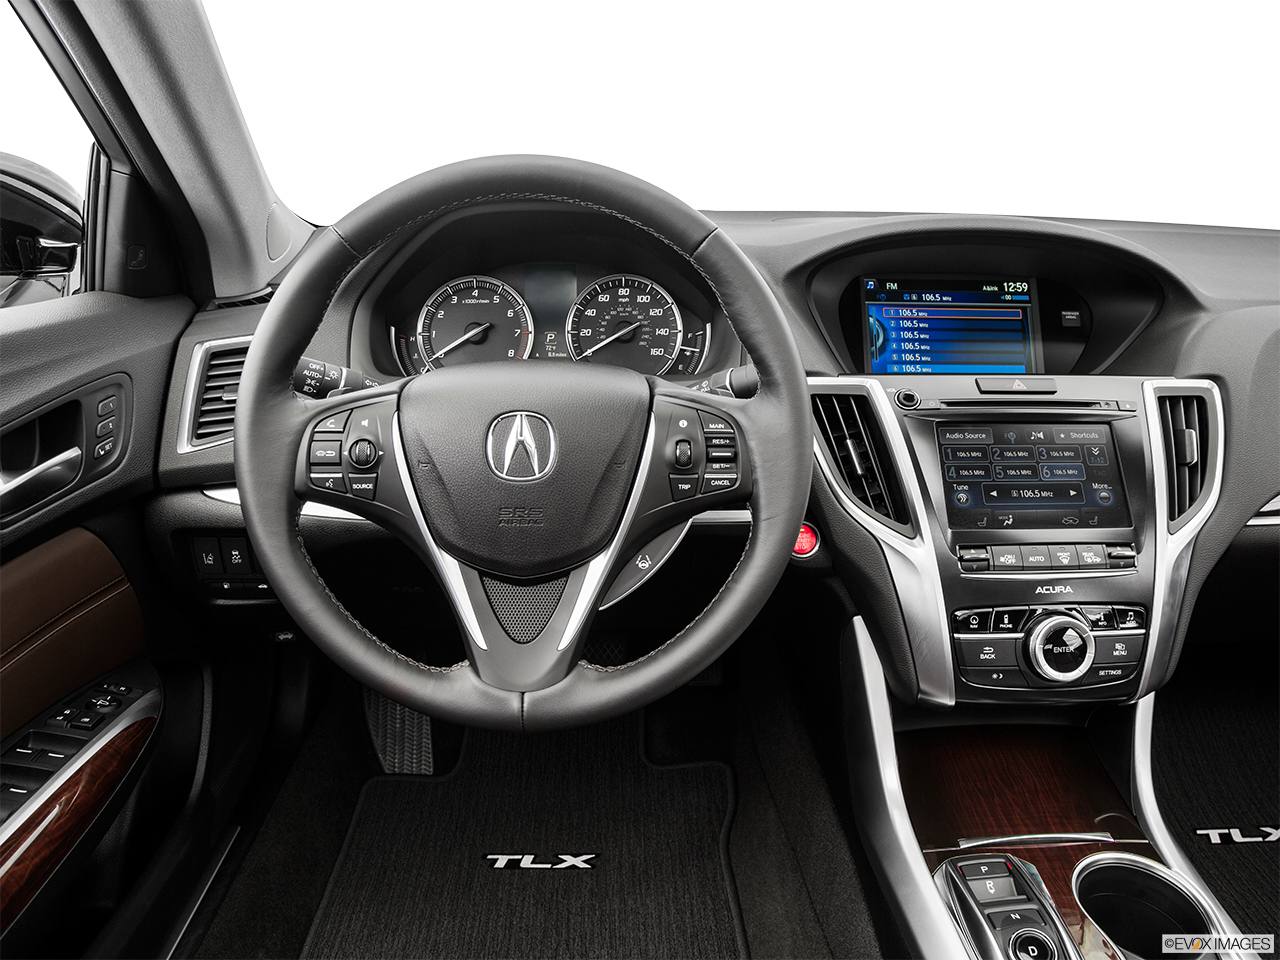 2015 Acura TLX 3.5 V-6 9-AT SH-AWD Steering wheel/Center Console. 